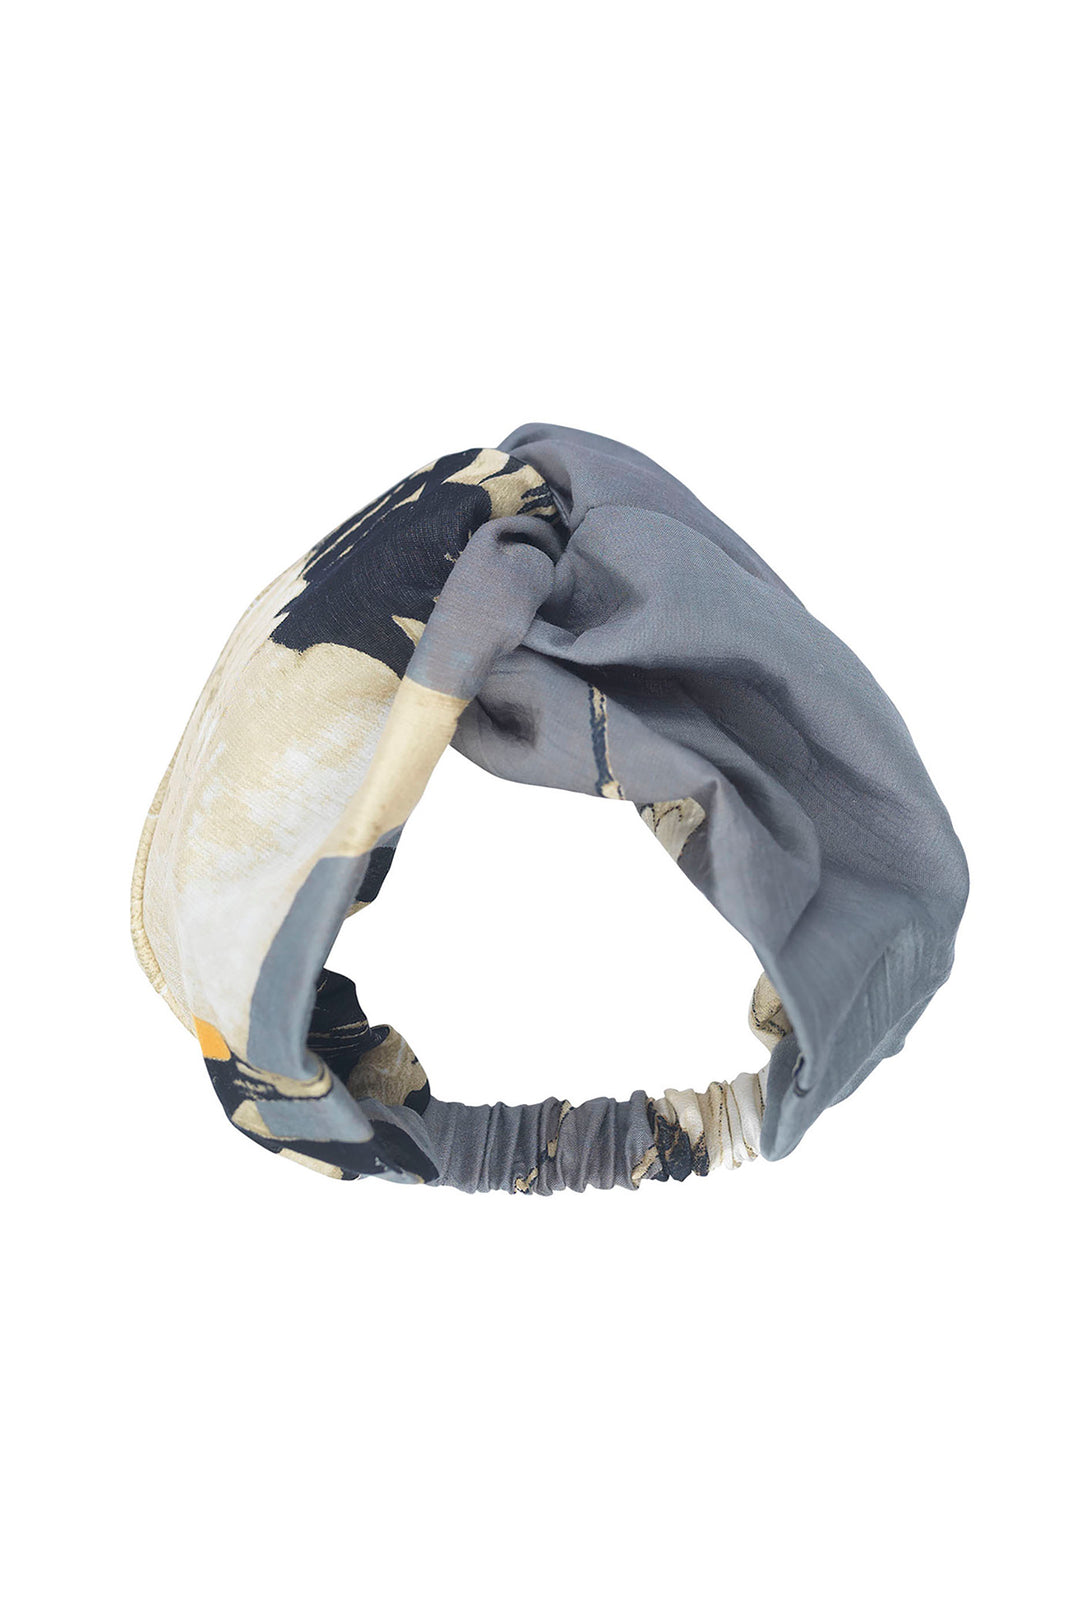 One Hundred Stars Stork Slate Headband- Our headbands are made from 100% recycled material using offcuts from our clothing production.